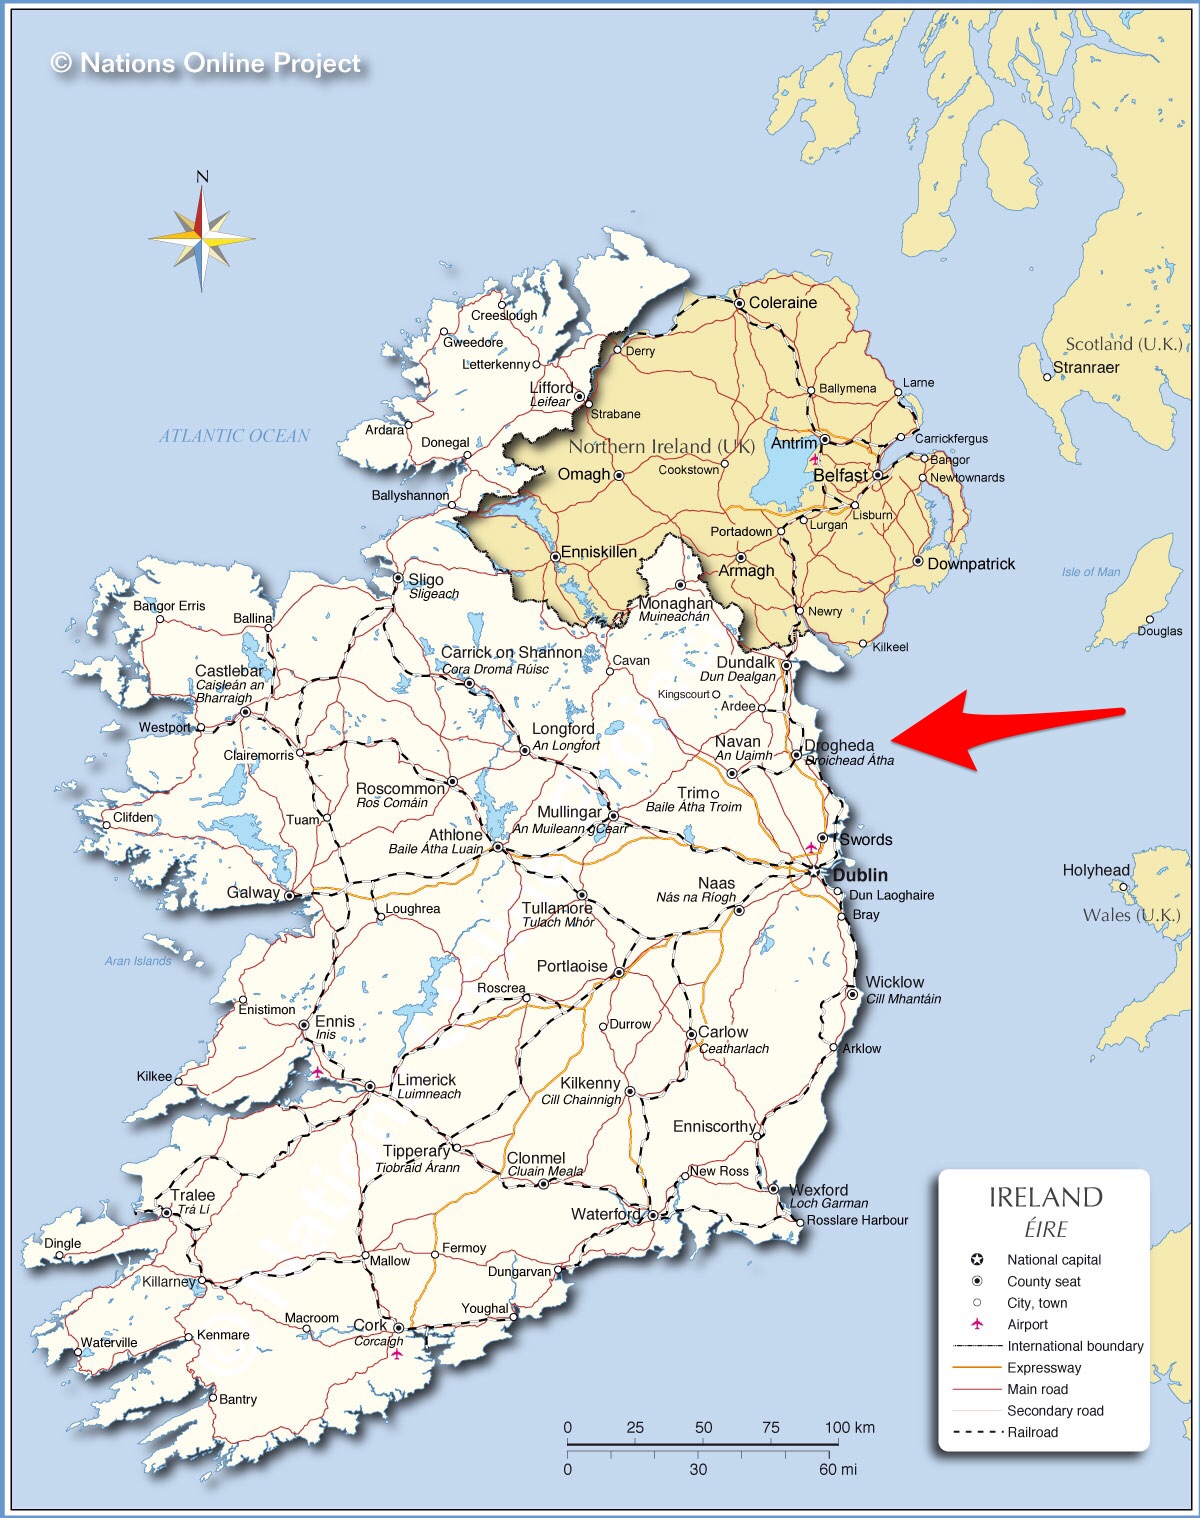 Annotated Map of Ireland